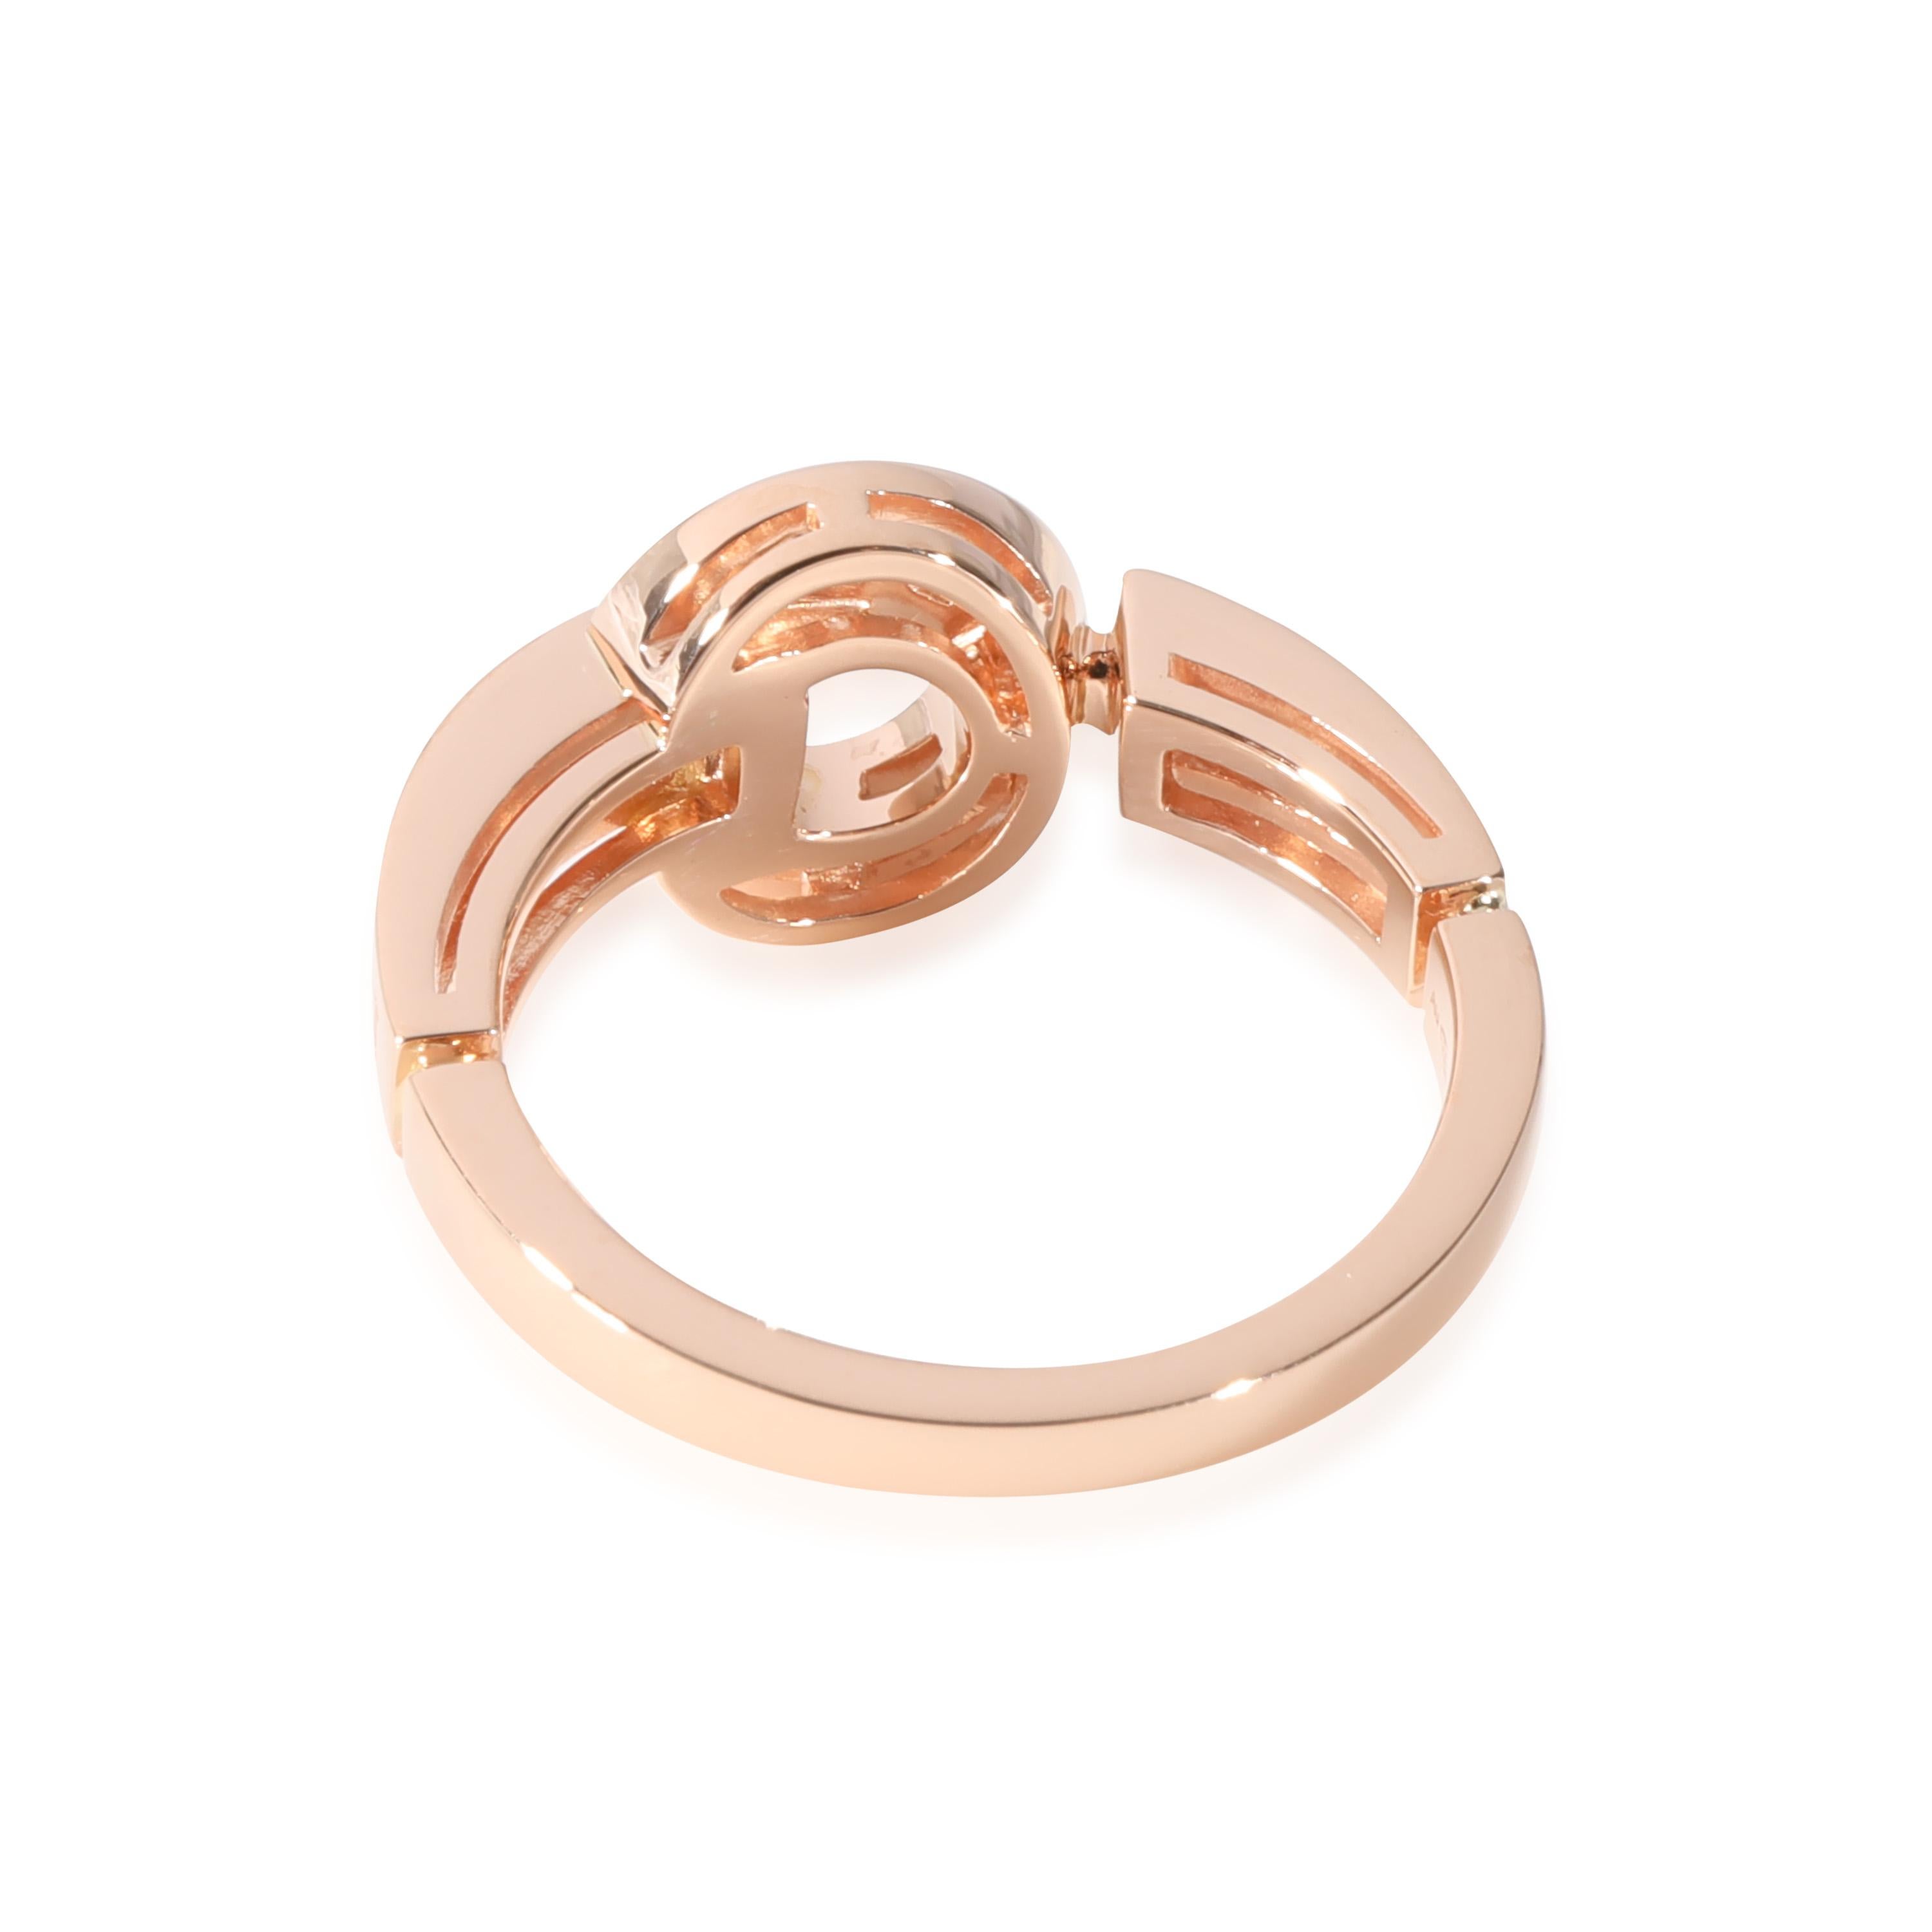 Bvlgari Bvlgari Bvlgari Diamond Ring in 18k Rose Gold 0.28 CTW In Excellent Condition For Sale In New York, NY